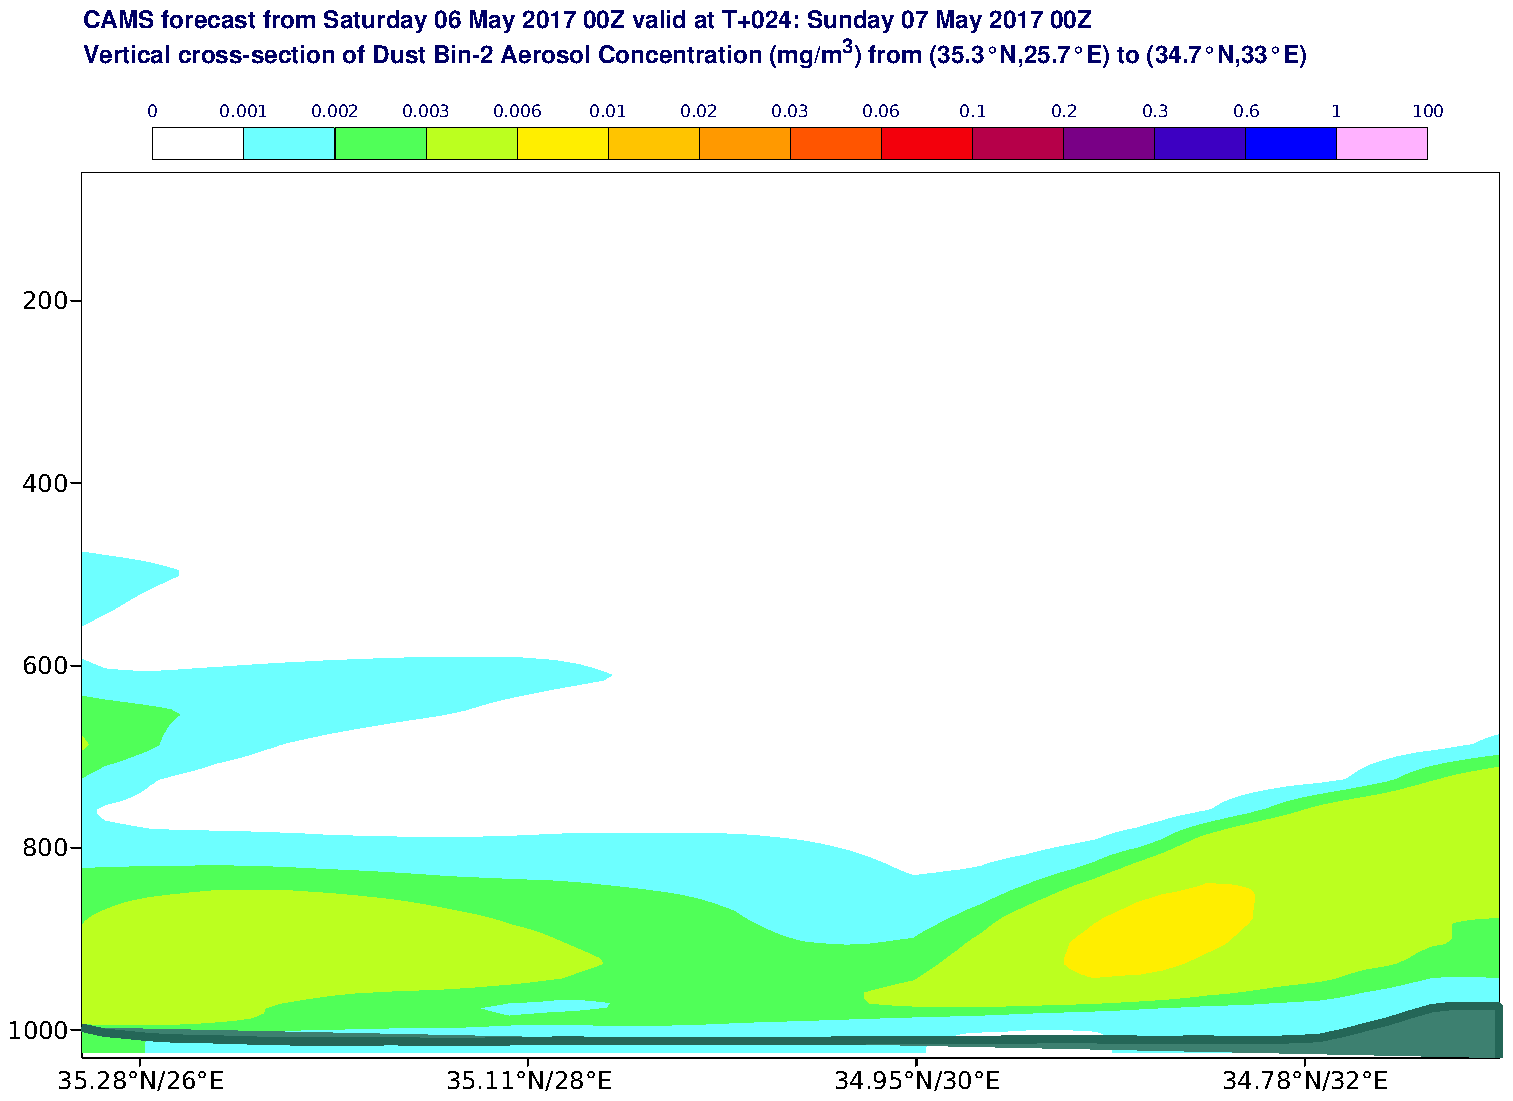 Vertical cross-section of Dust Bin-2 Aerosol Concentration (mg/m3) valid at T24 - 2017-05-07 00:00